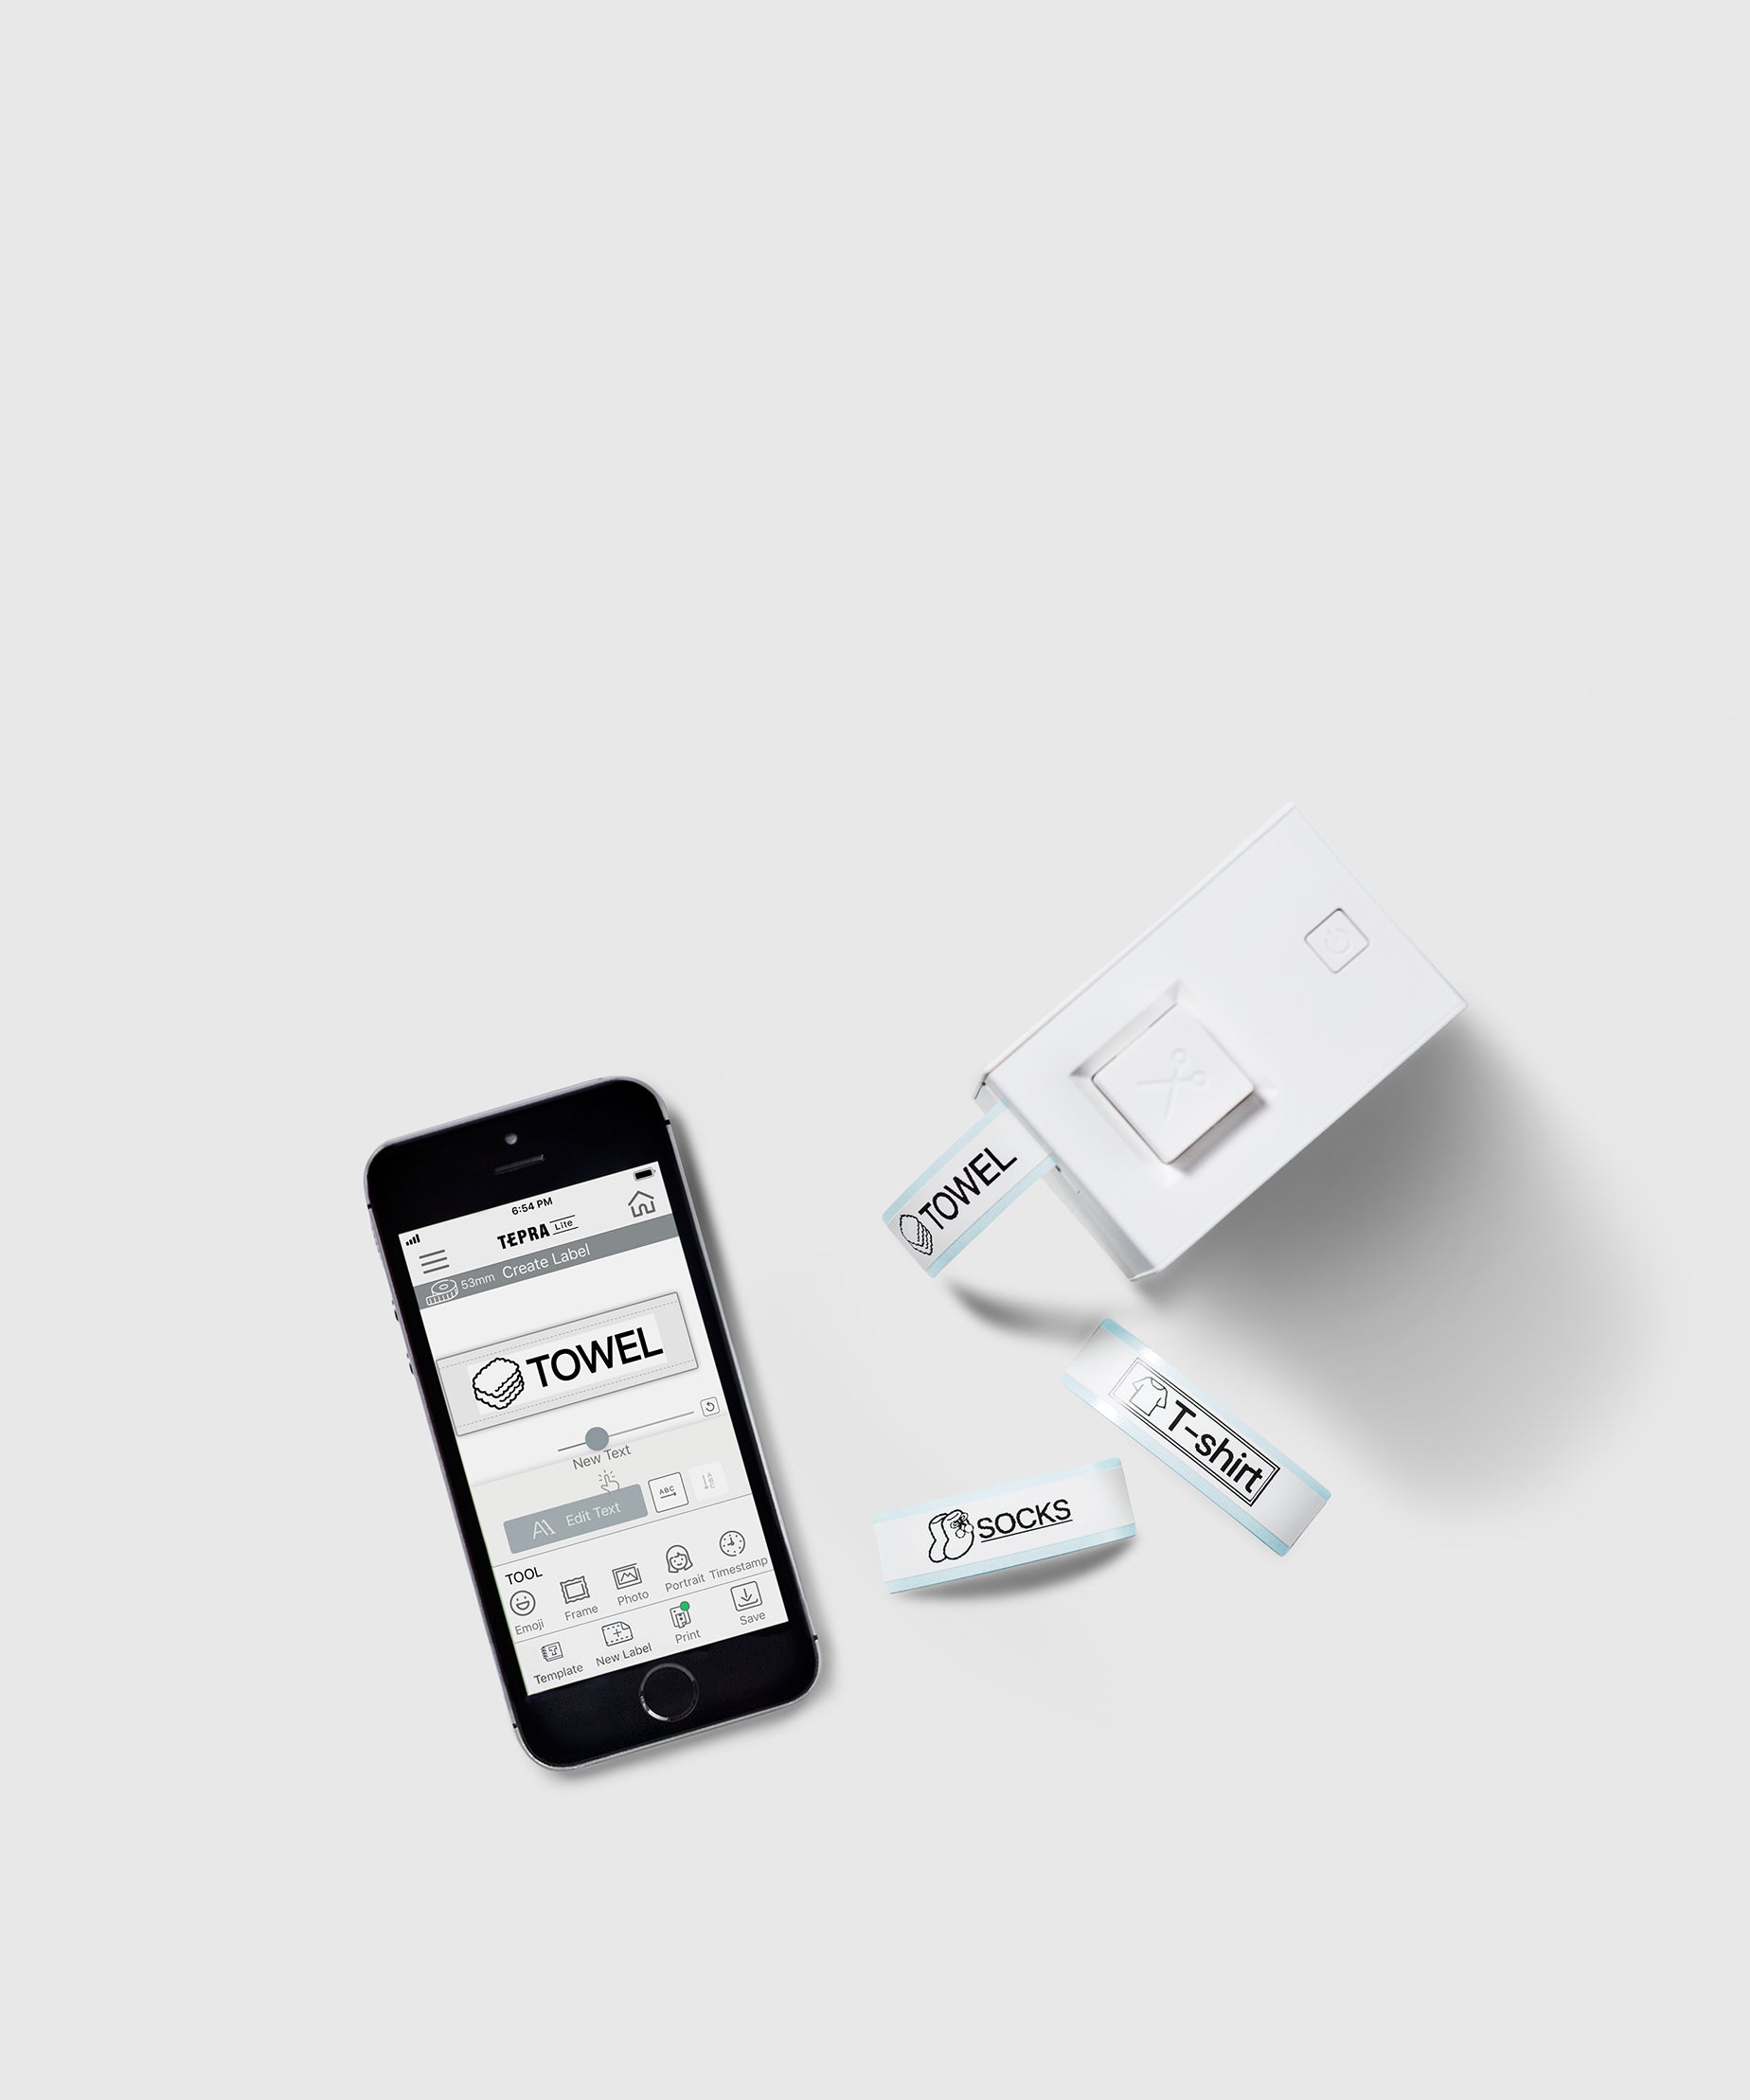 Digital Label Maker for Smartphone (iOS and Android) | Shop at KonMari